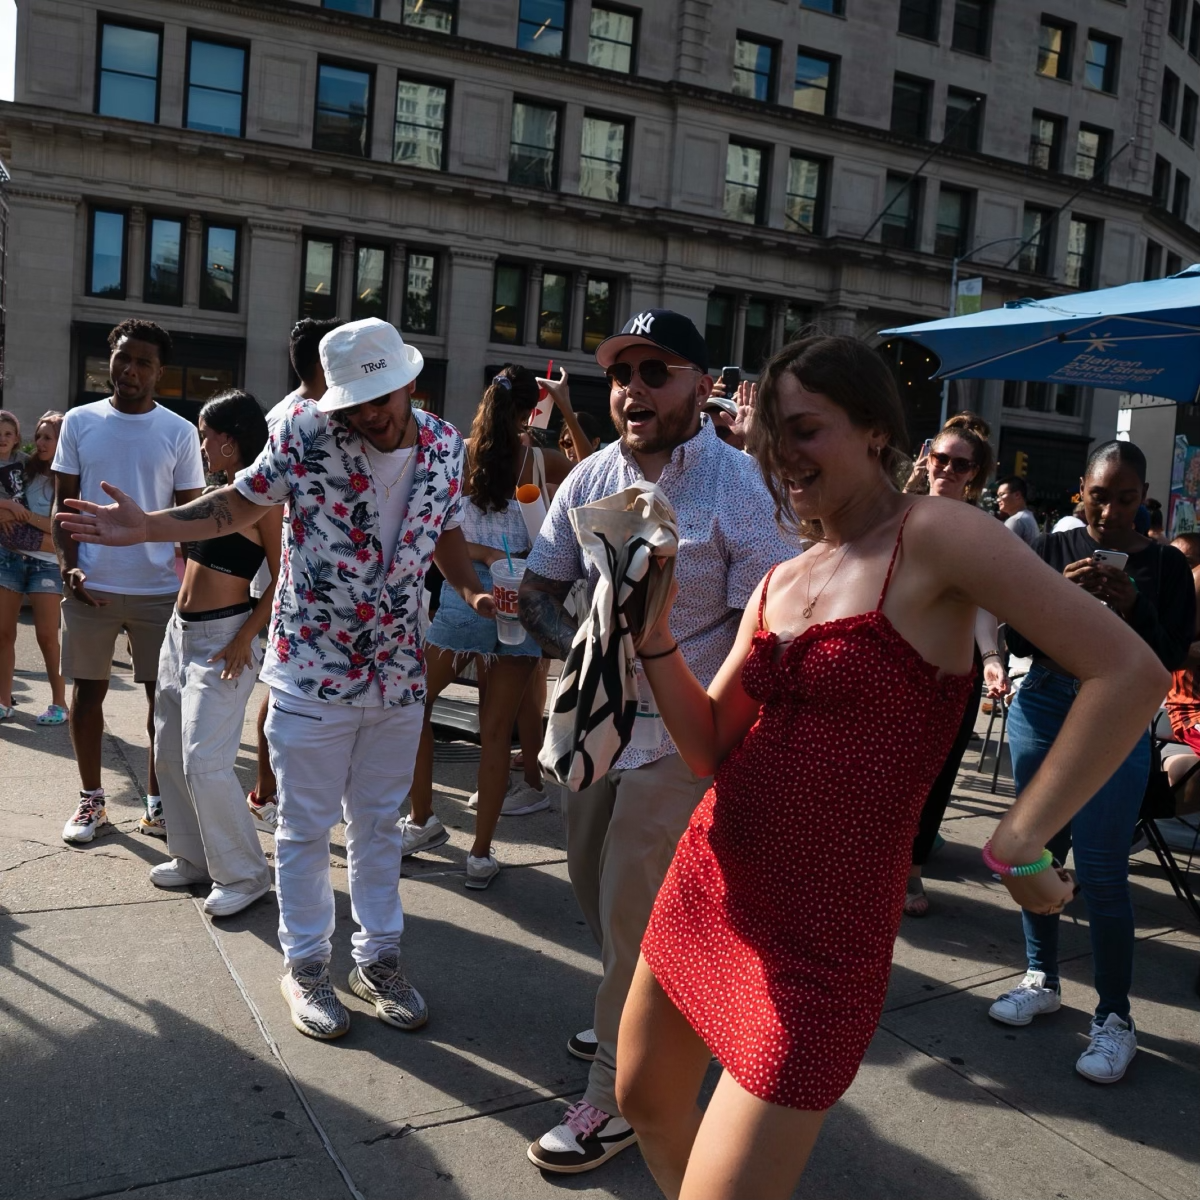 A group of people dance in an open plaza